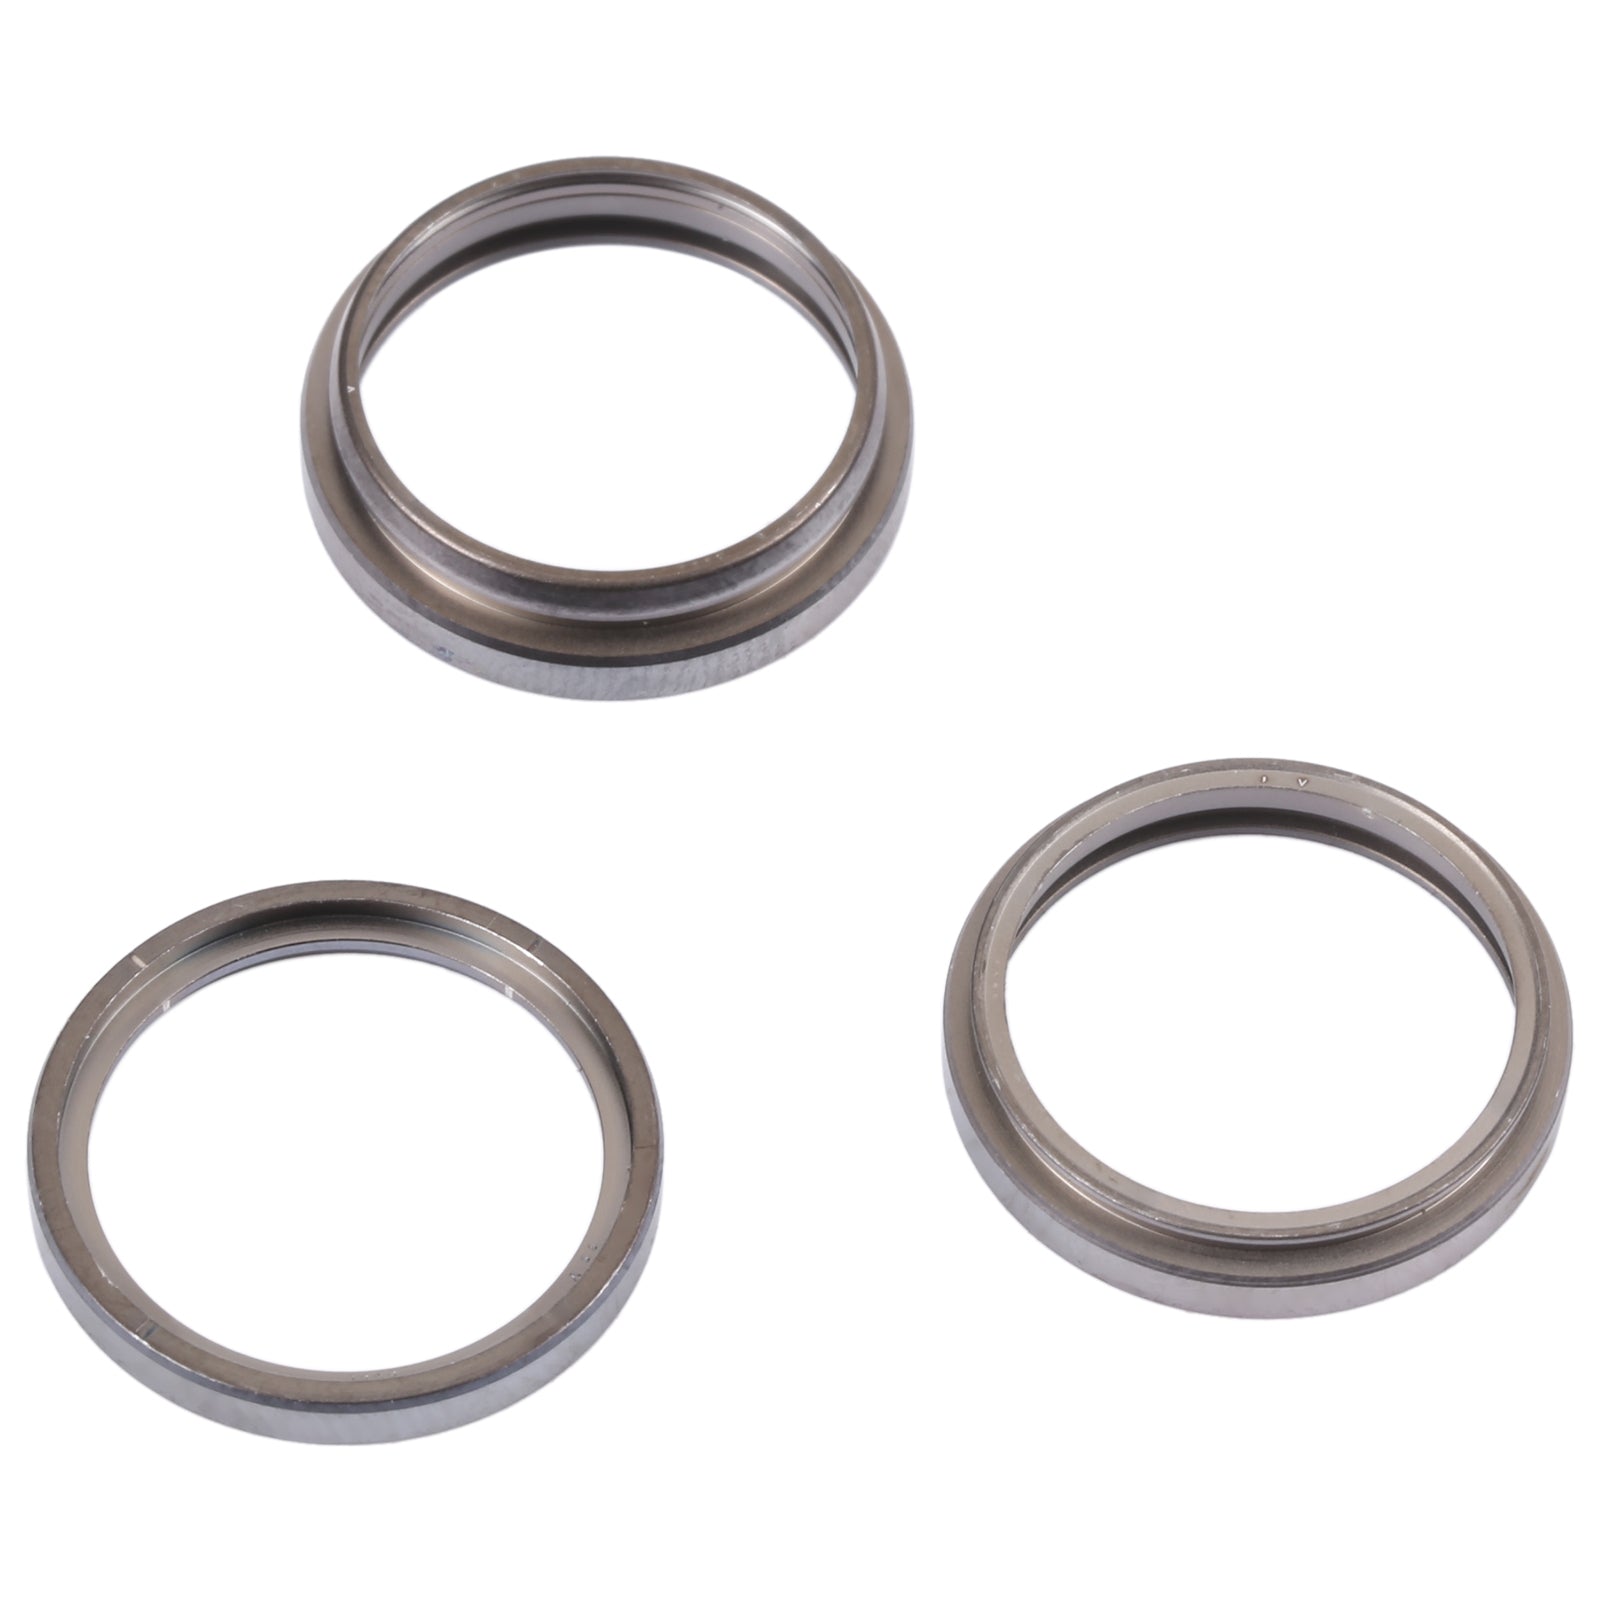 Rings for Rear Camera Lens Apple iPhone 14 Pro Max Gray